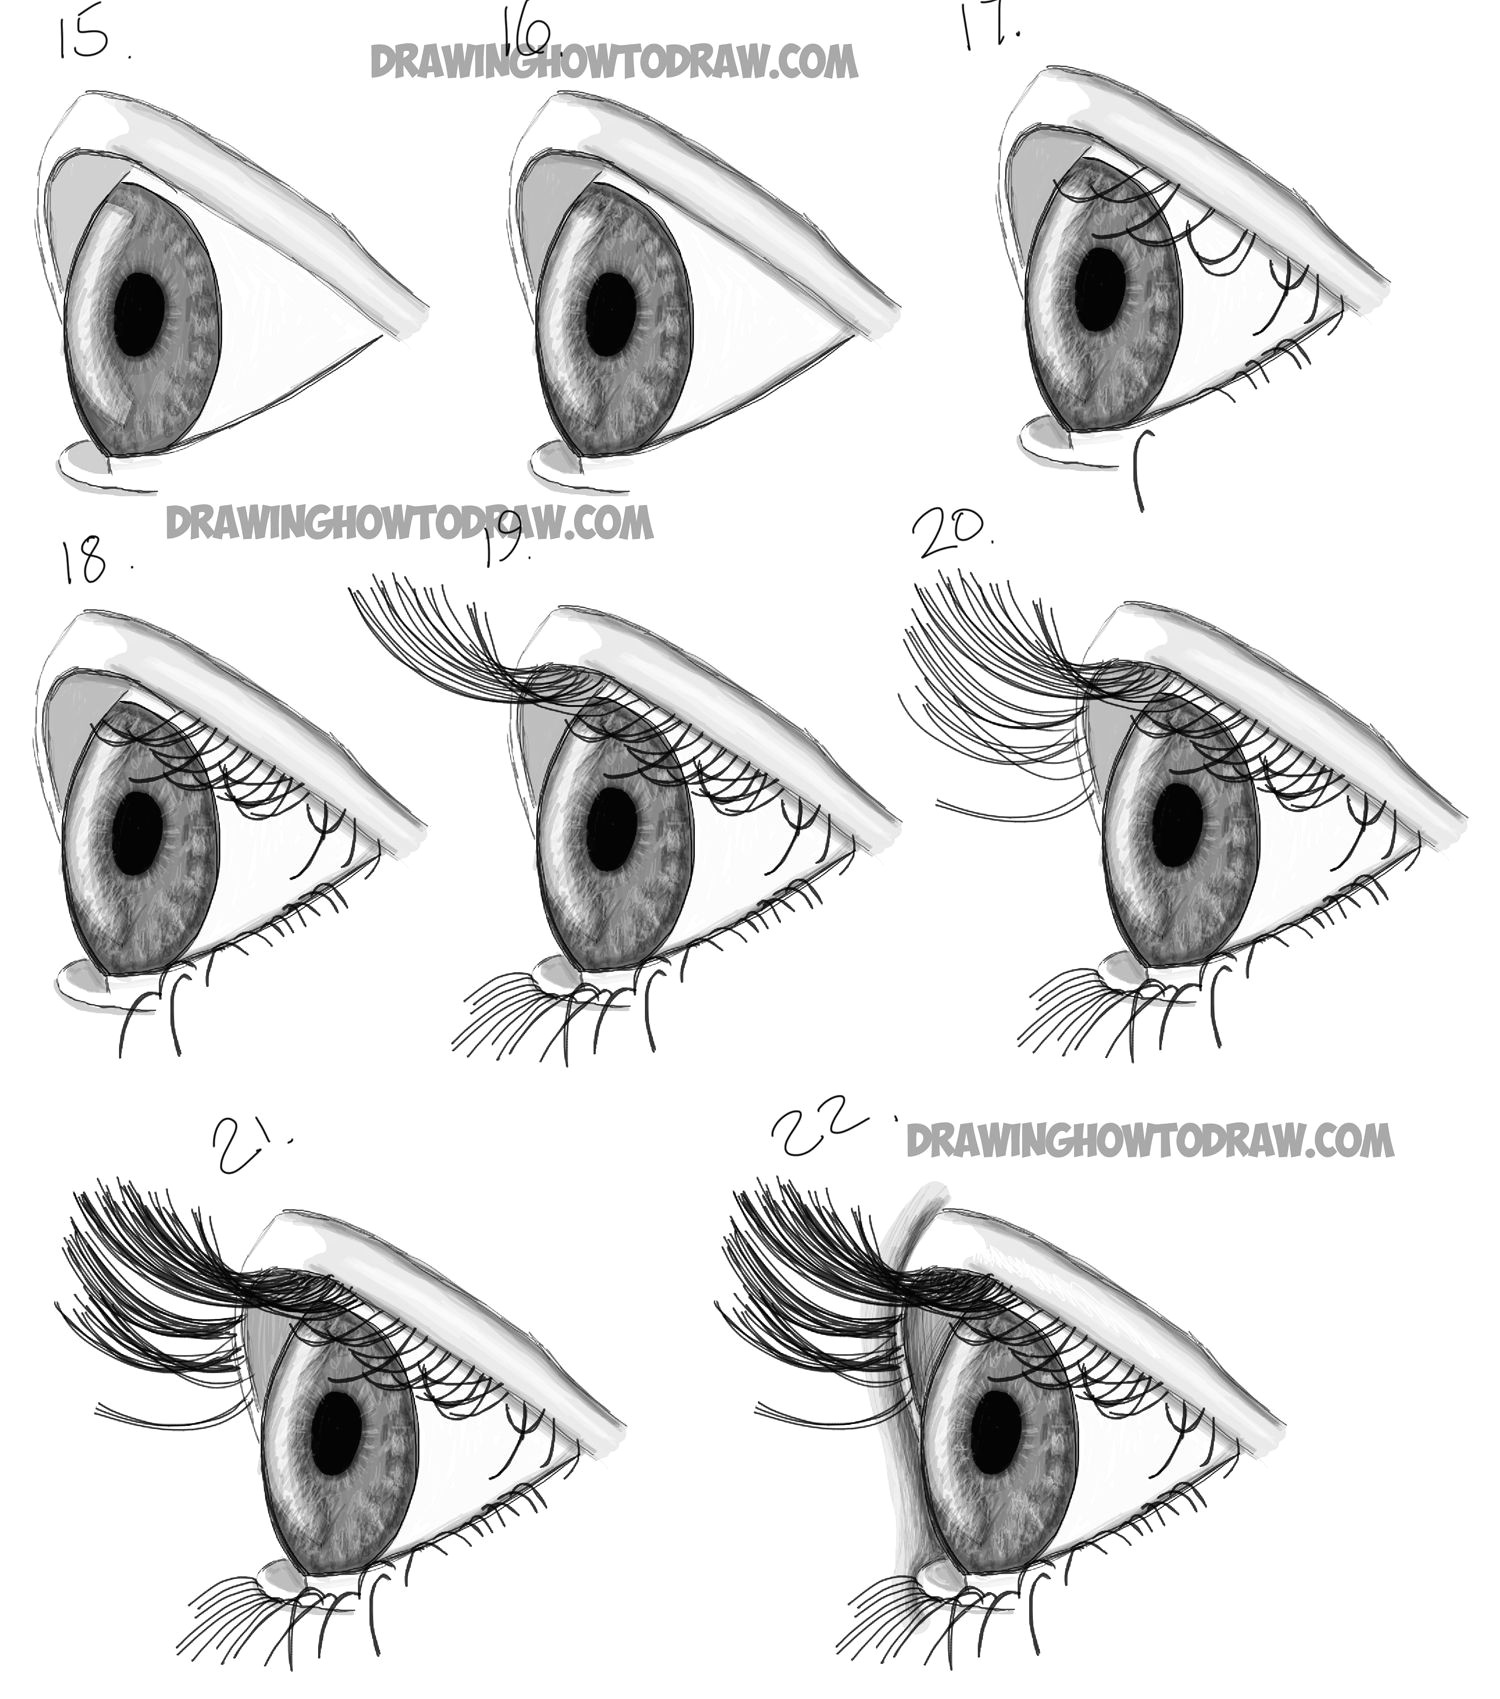 Drawings Of Eyes Step by Step How to Draw Realistic Eyes From the Side Profile View Step by Step